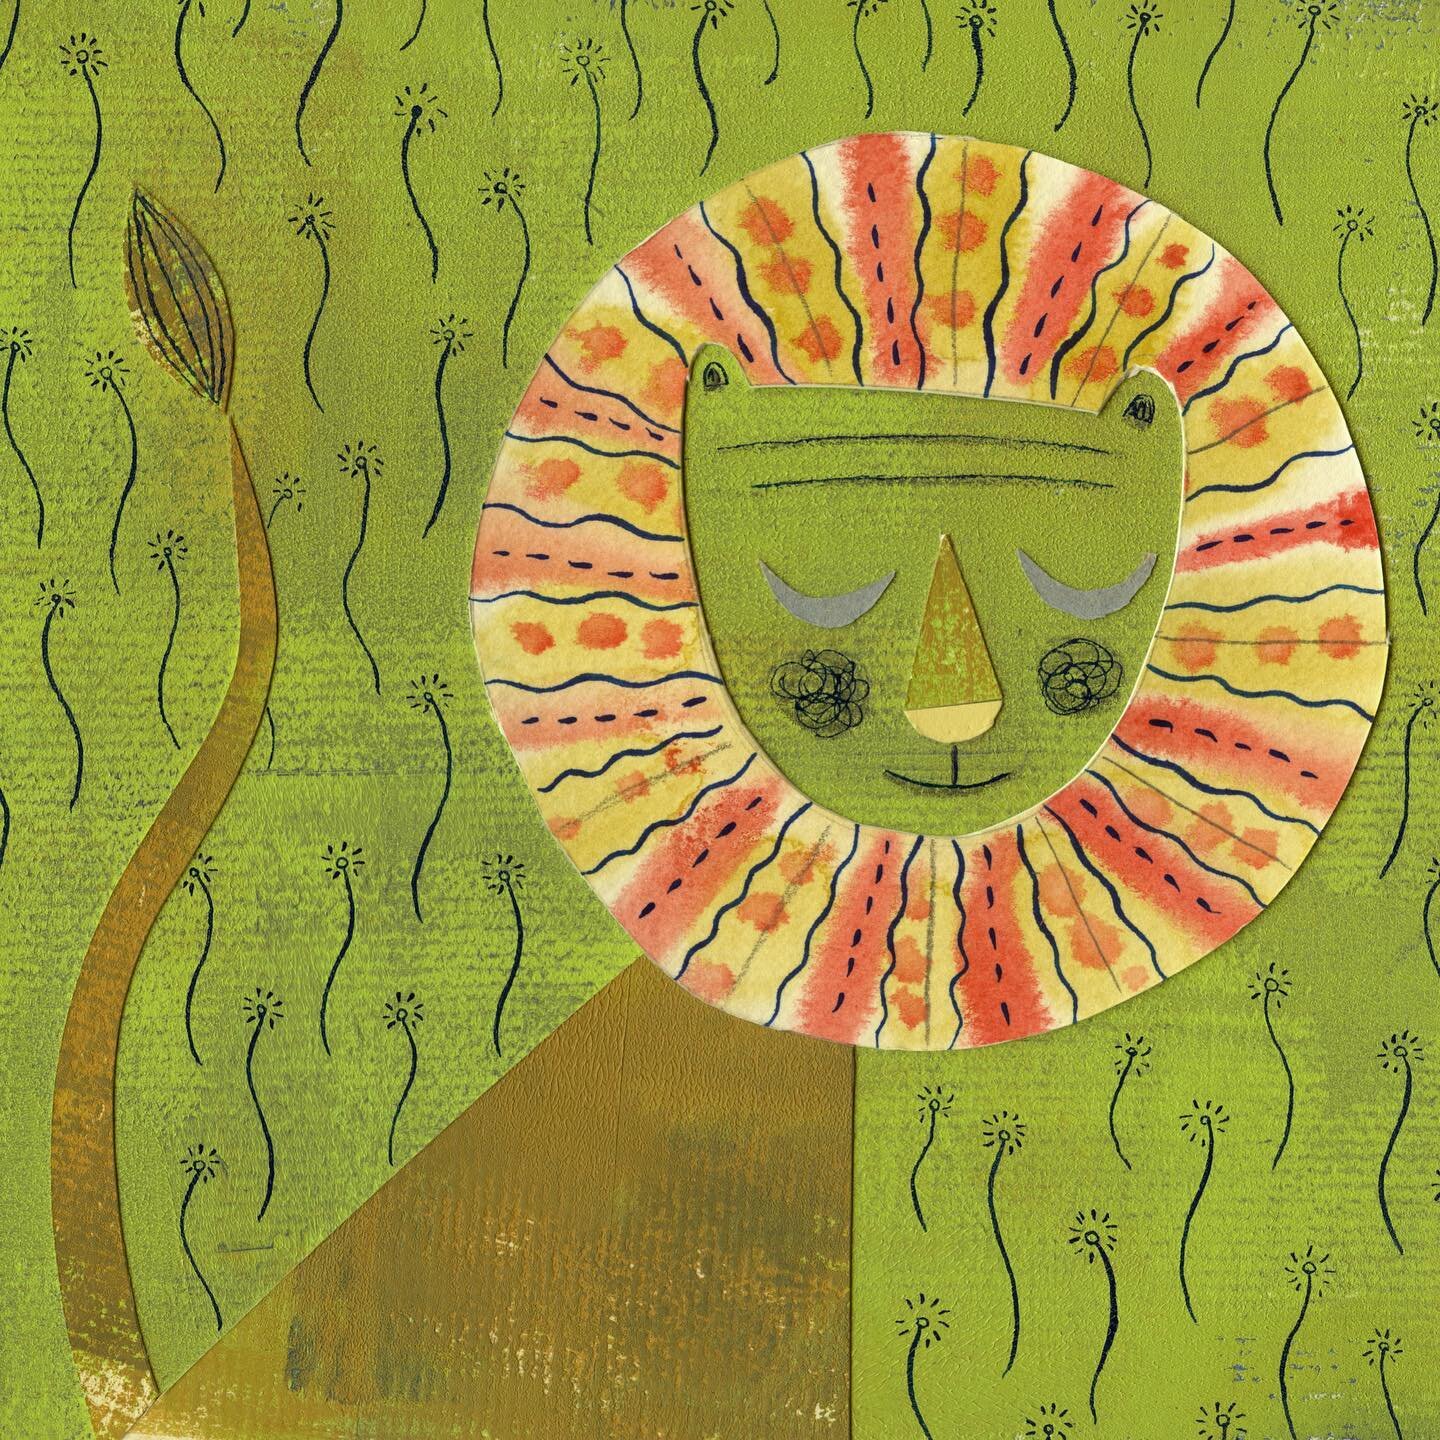 I paint textures for my illustrations a lot and generally toss them. But today, I made a lion instead. 

#lion #lionillustration #collageart #kidlitart #lionfriend #dandelion #acrylicpainting #watercolor